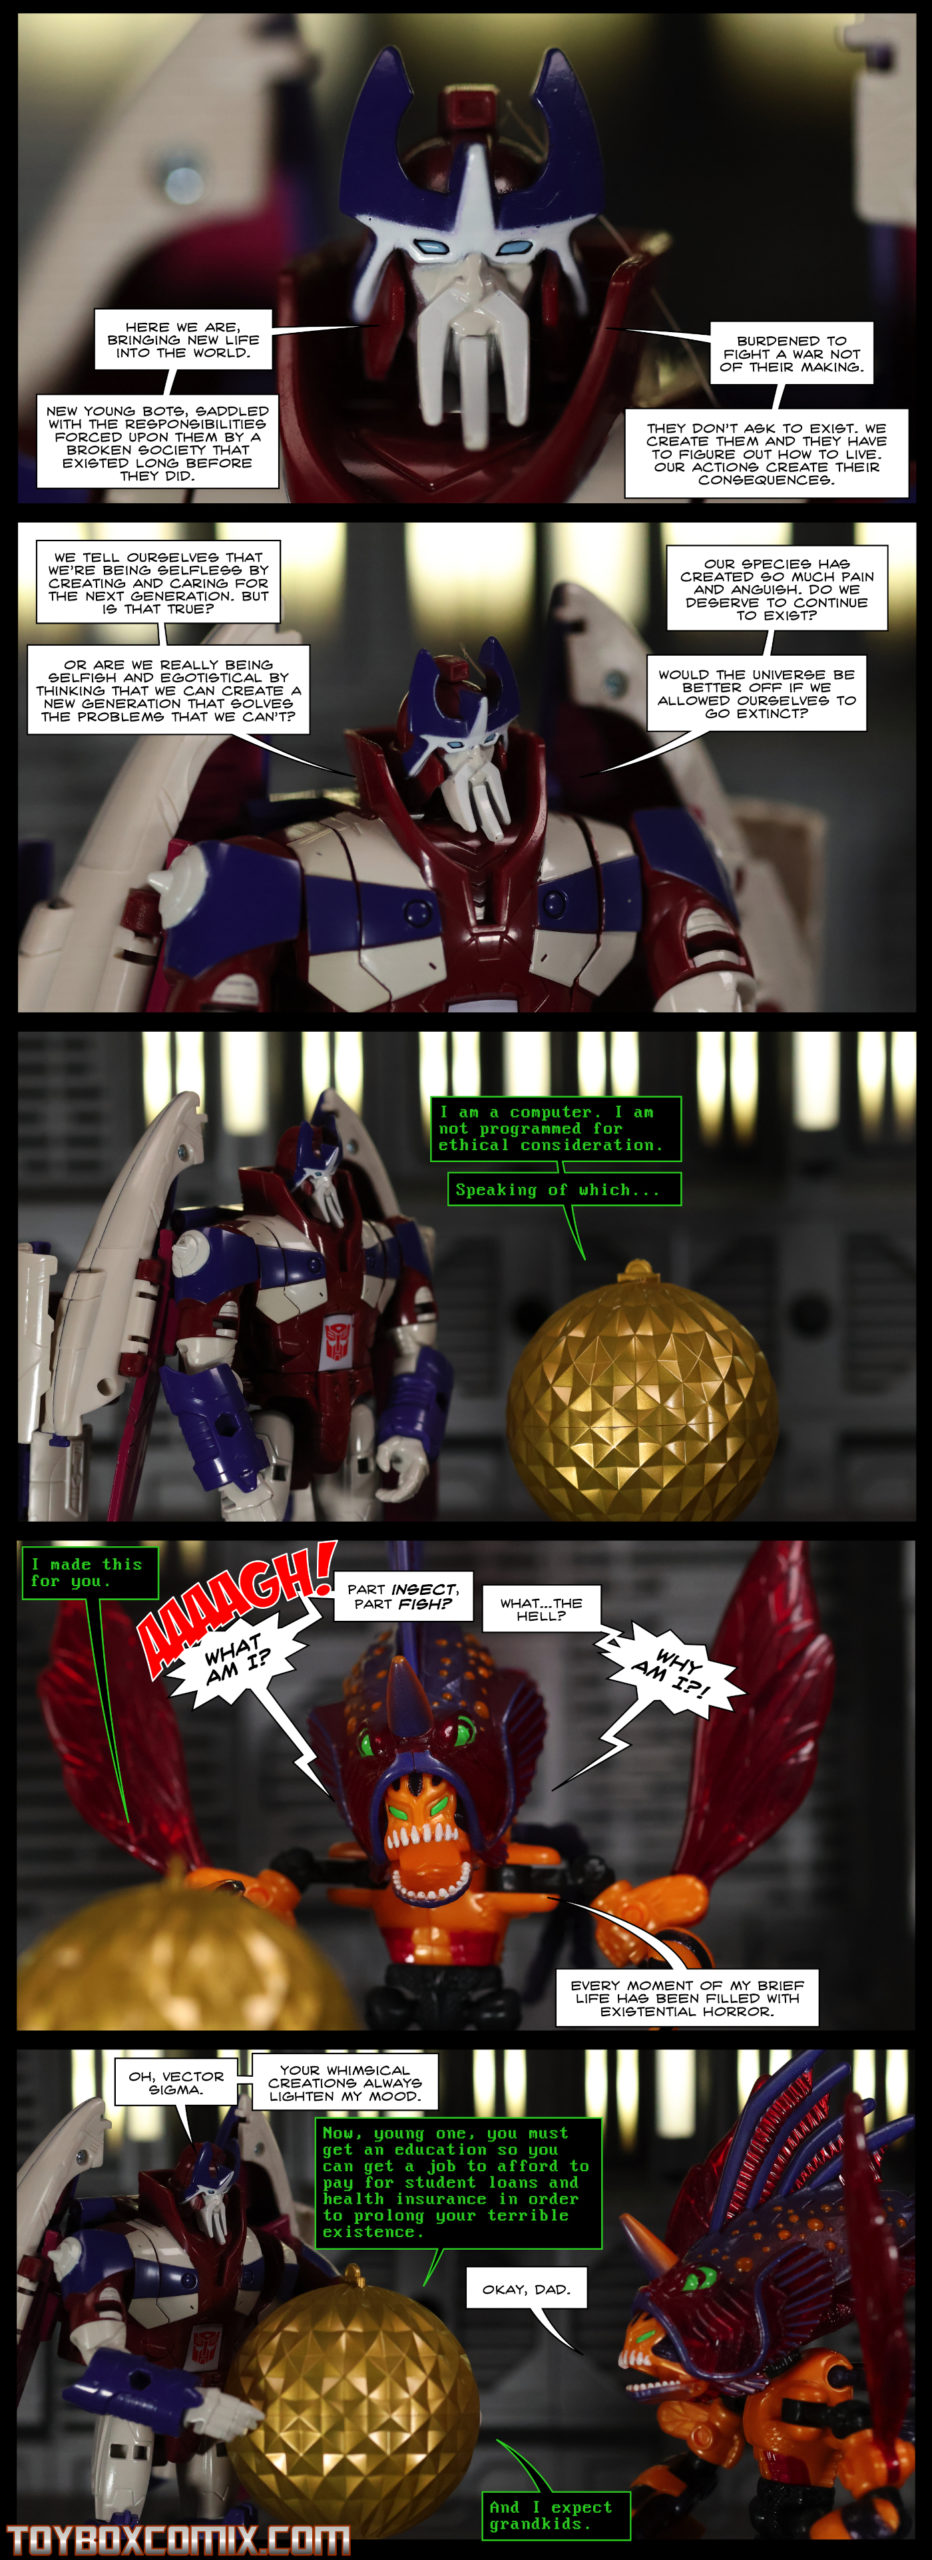 First panel: Alpha Trion: “Here we are, bringing new life into the world. New young bots, saddled with the responsibilities forced upon them by a broken society that existed long before they did. Burdened to fight a war not of their making. They don’t ask to exist. We create them and they have to figure out how to live. Our actions create their consequences.” Second panel: Alpha Trion: “We tell ourselves that we’re being selfless by creating and caring for the next generation. But is that true? Or are we really being selfish and egotistical by thinking that we can create a new generation that solves the problems that we can’t? Our species has created so much pain and anguish. Do we deserve to continue to exist? Would the universe be better off if we allowed ourselves to go extinct?” Third panel: Vector Sigma to Alpha Trion: “I am a computer. I am not programmed for ethical consideration. Speaking of which…” Fourth panel: Vector Sigma: “I made this for you.” Beast Wars Fuzor Injector: “AAAGH! WHAT AM I?! Part insect, part fish? What…the hell? WHY AM I?! Every moment of my brief life has been filled with existential horror.” Fifth panel: Alpha Trion: “Oh, Vector Sigma. Your whimsical creations always lighten my mood.” Vector Sigma: “Now, young one, you must get an education so you can get a job to afford to pay for student loans and health insurance in order to prolong your terrible existence.” Injector: “Okay, dad.” Vector Sigma: “And I expect grandkids.”